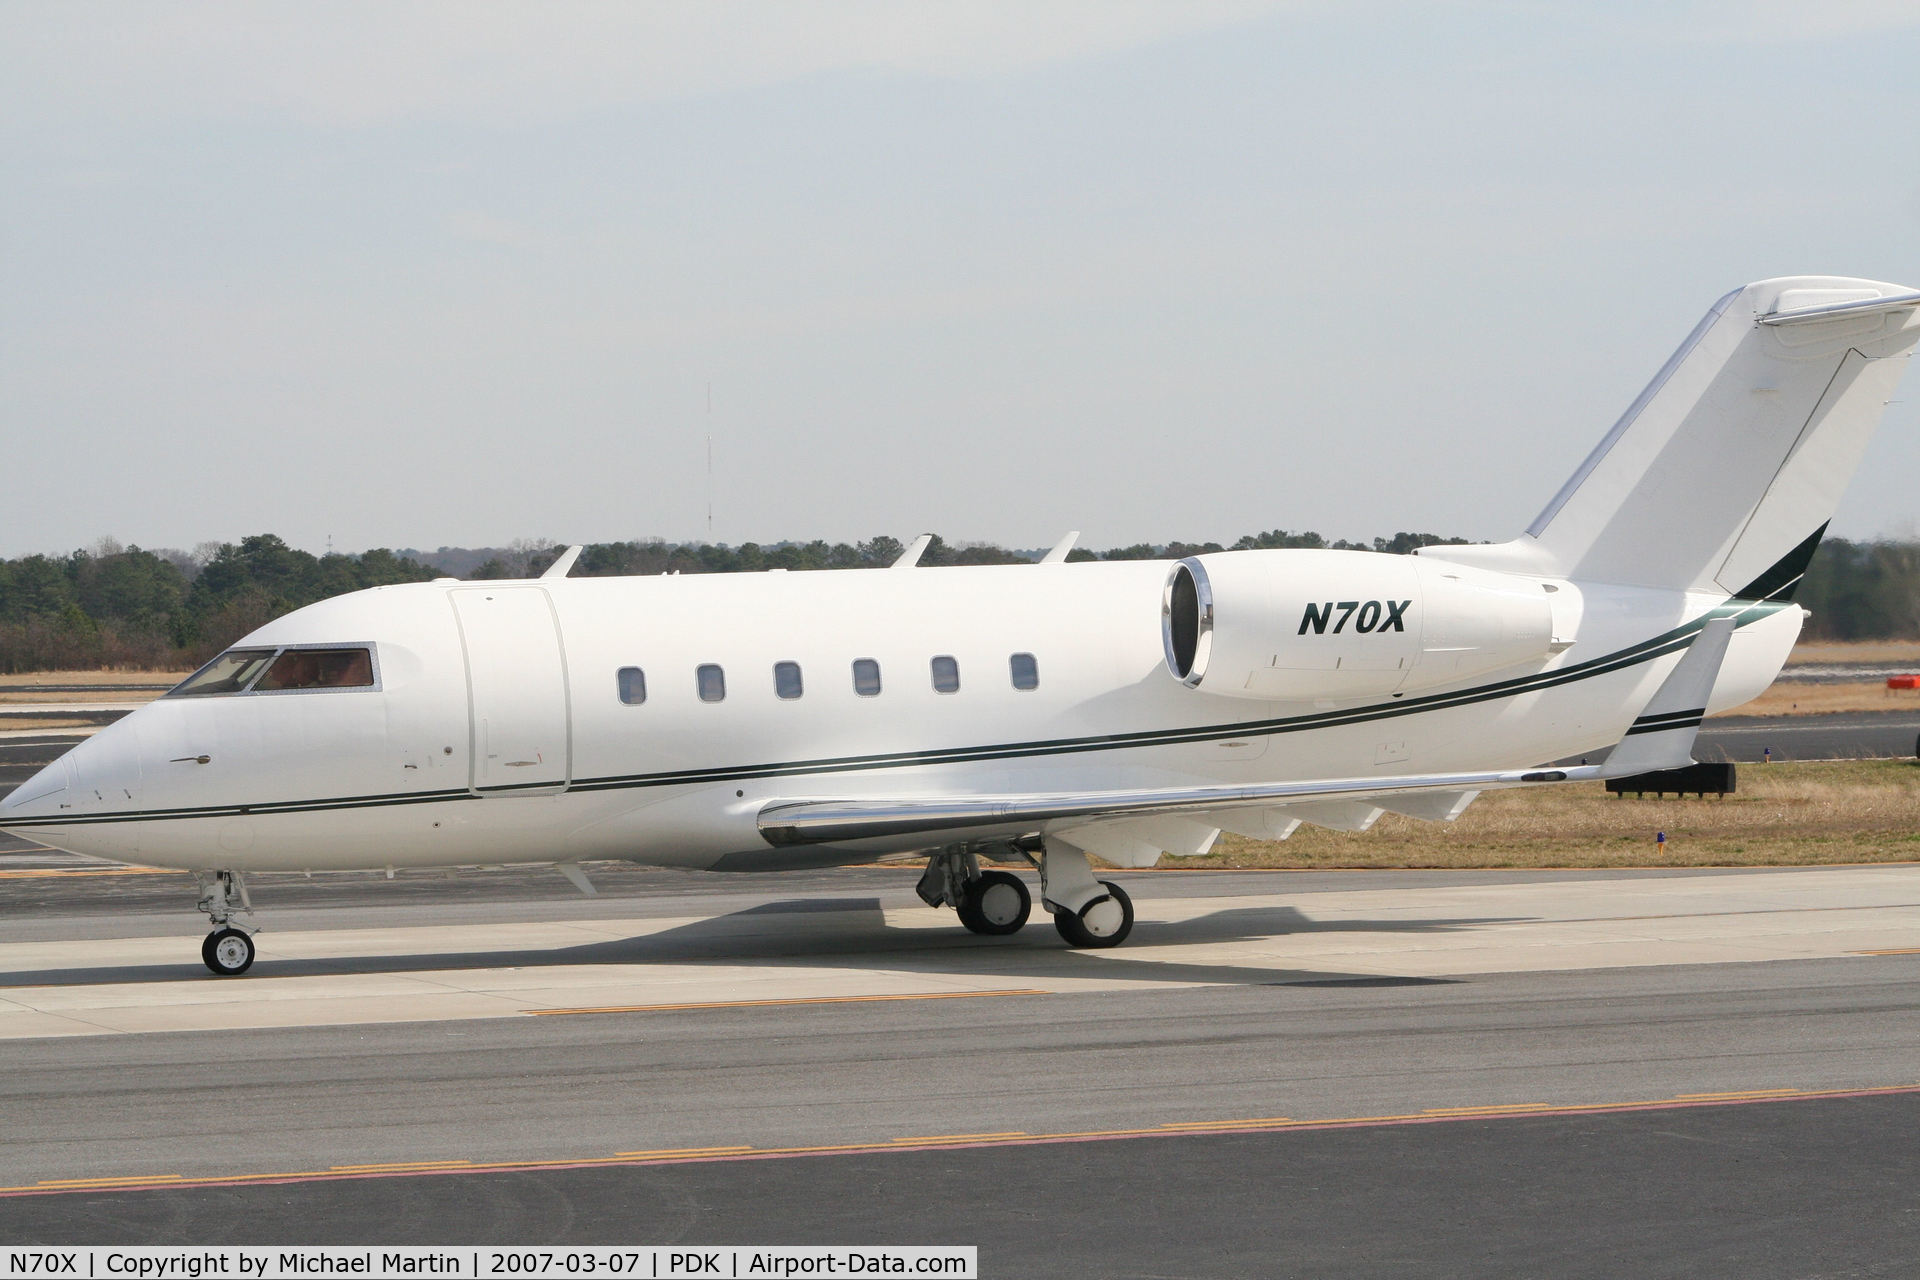 N70X, 1981 Canadair Challenger 600 (CL-600-1A11) C/N 1032, Taxing to Signature Flight Services